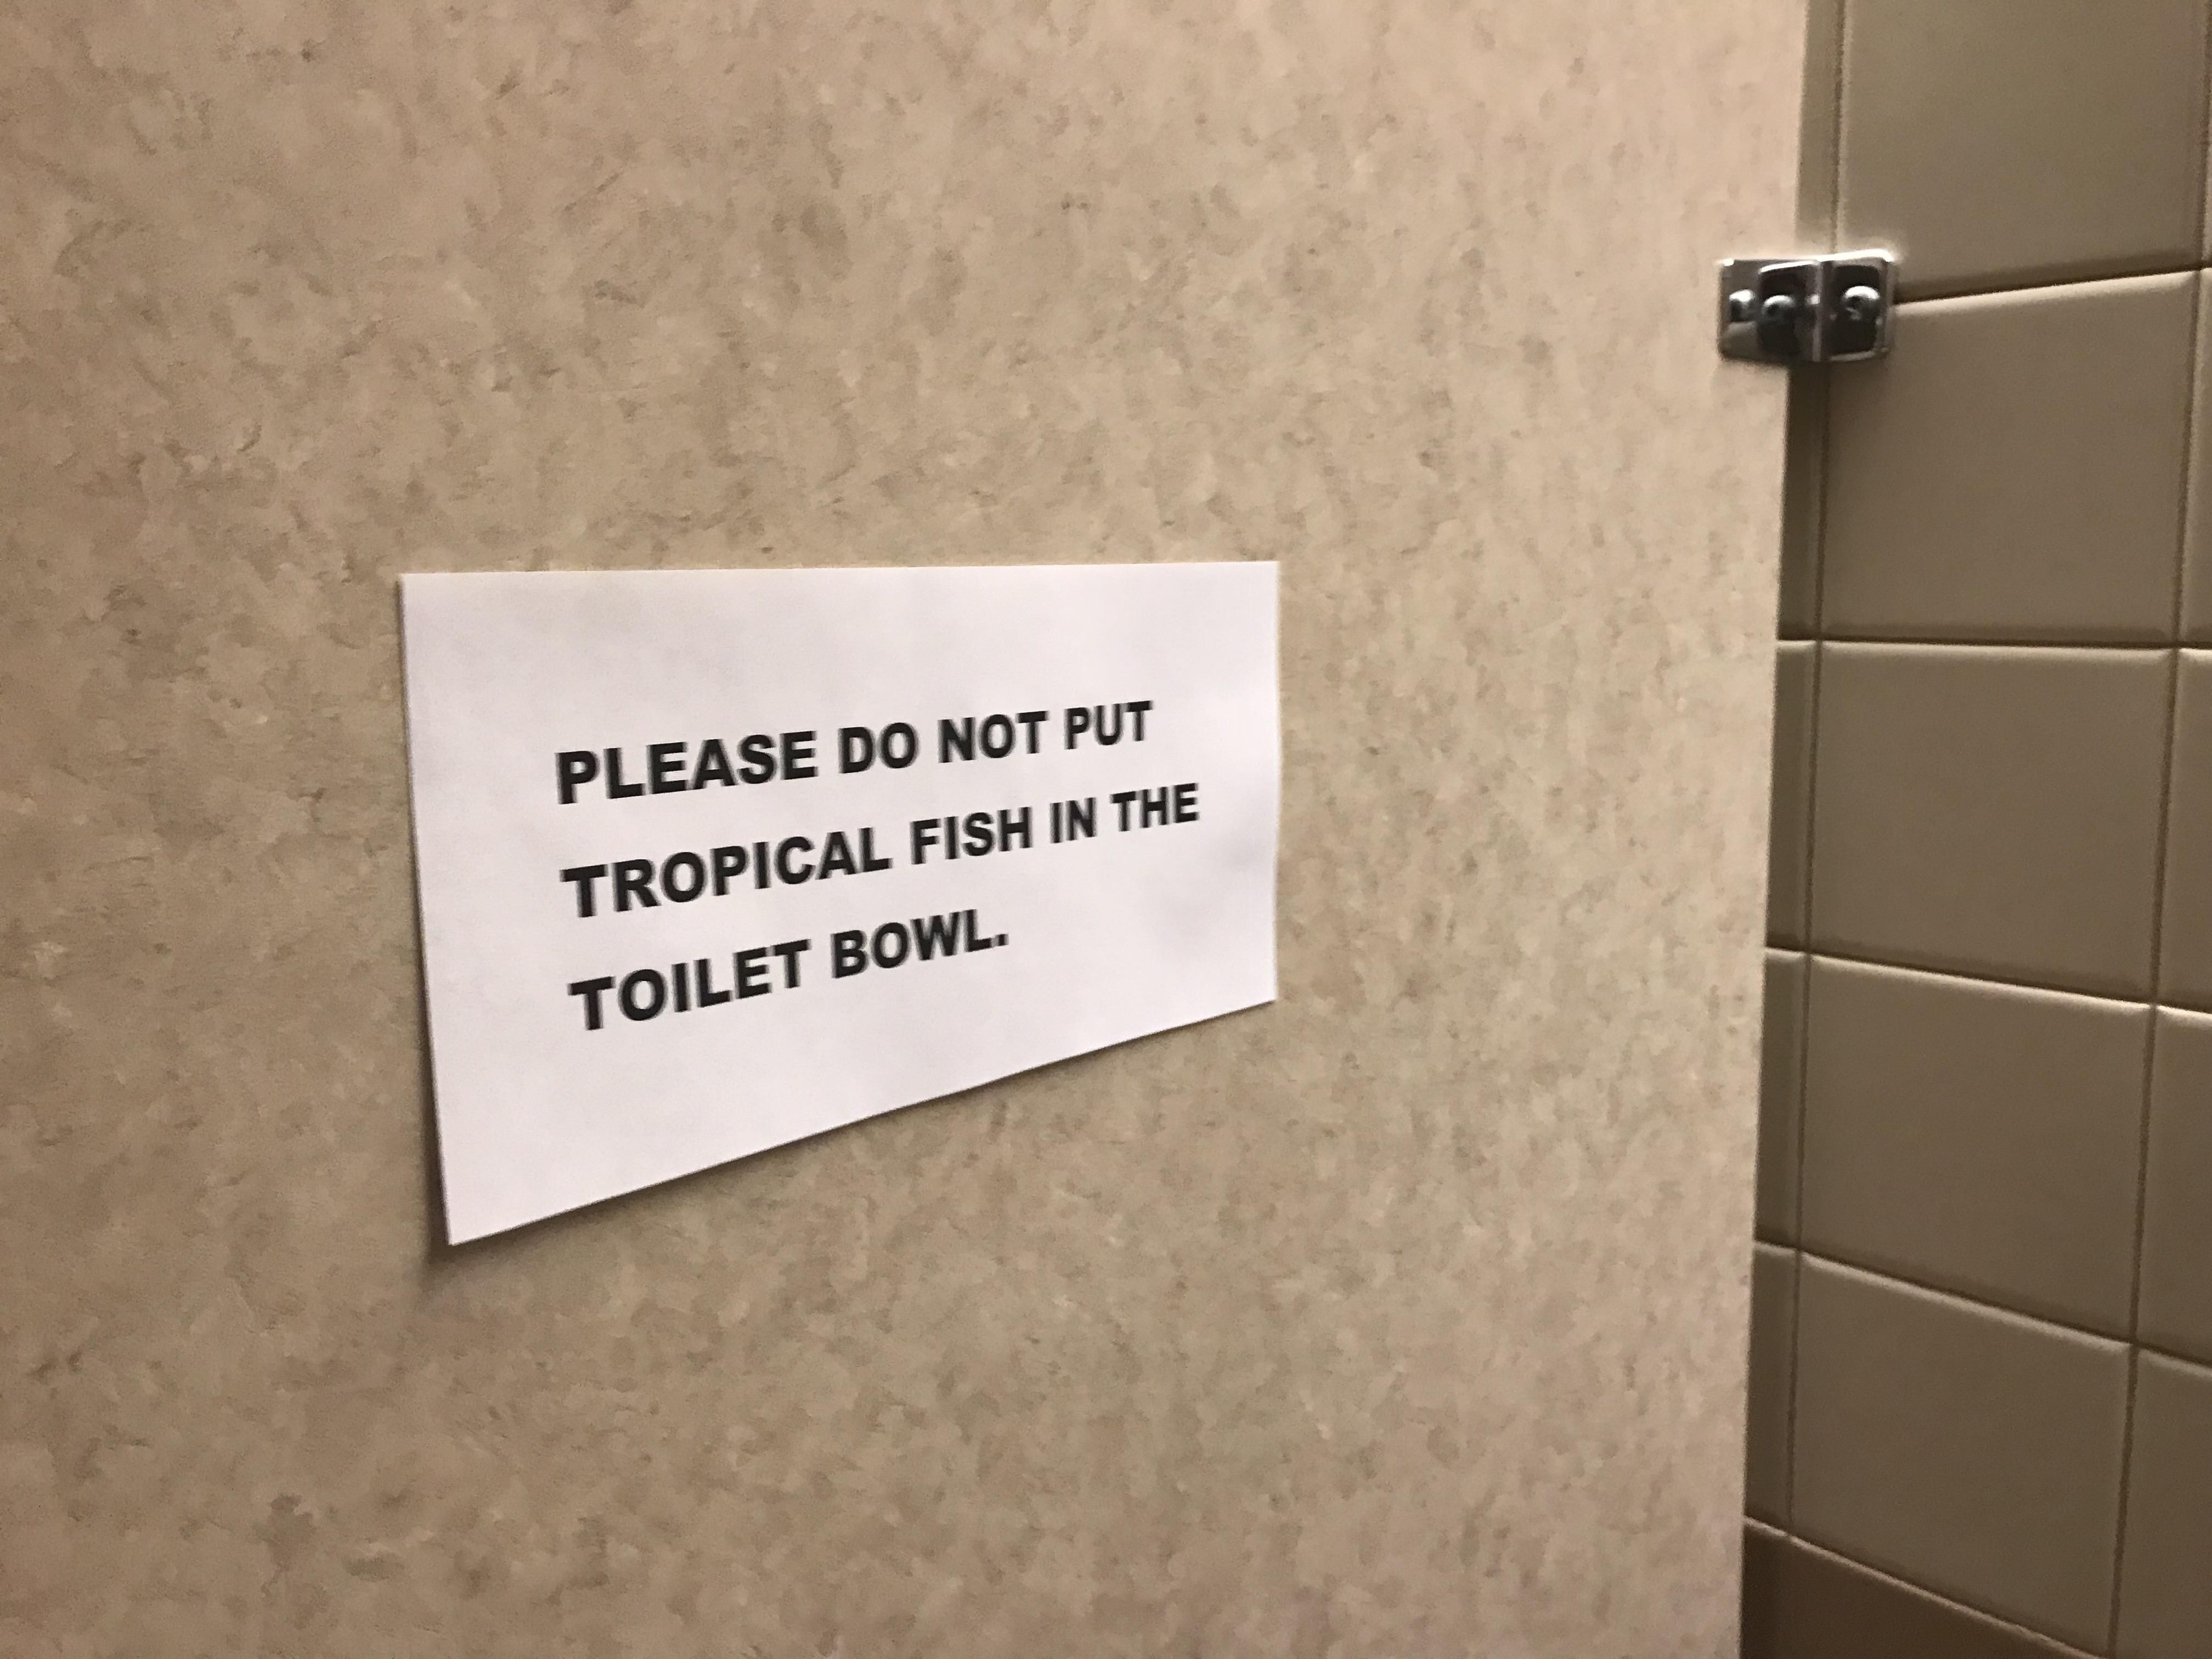 There must be a great reason this sign showed up in my workplace bathroom.